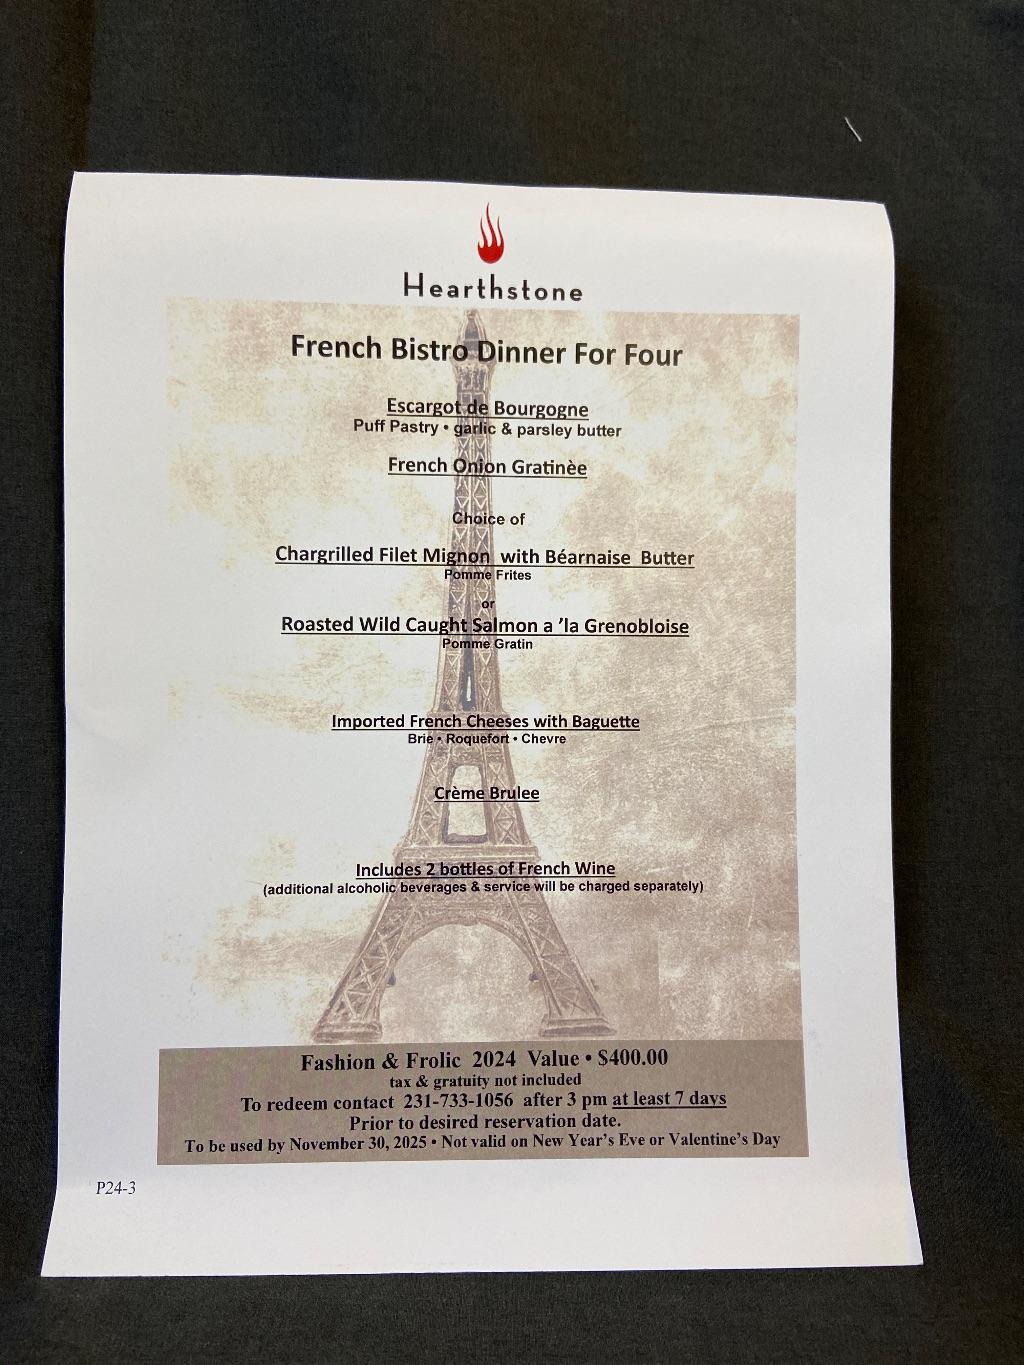 Hearthstone Bistro French Dinner for Four